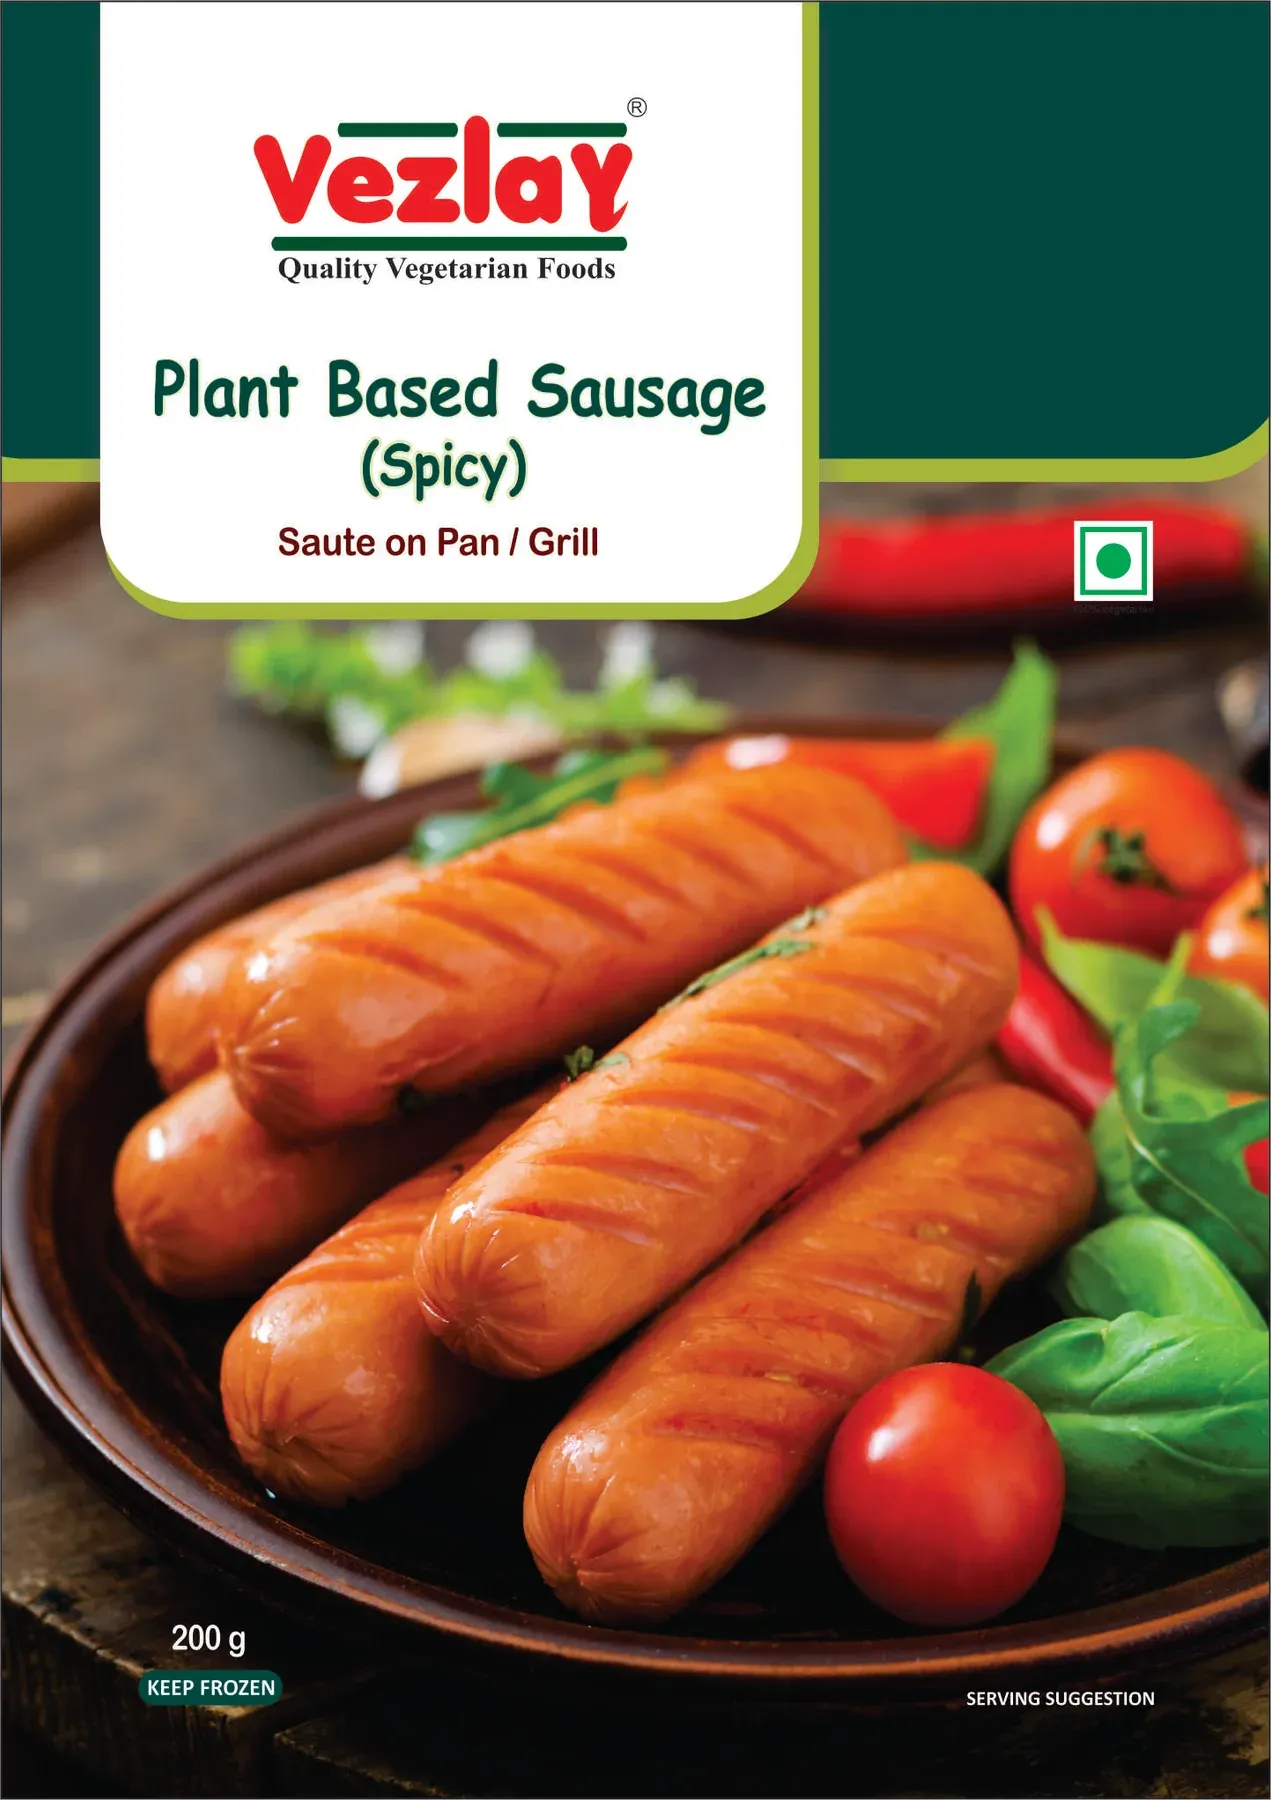 Vezlay Plant Based Sausages Spicy Image